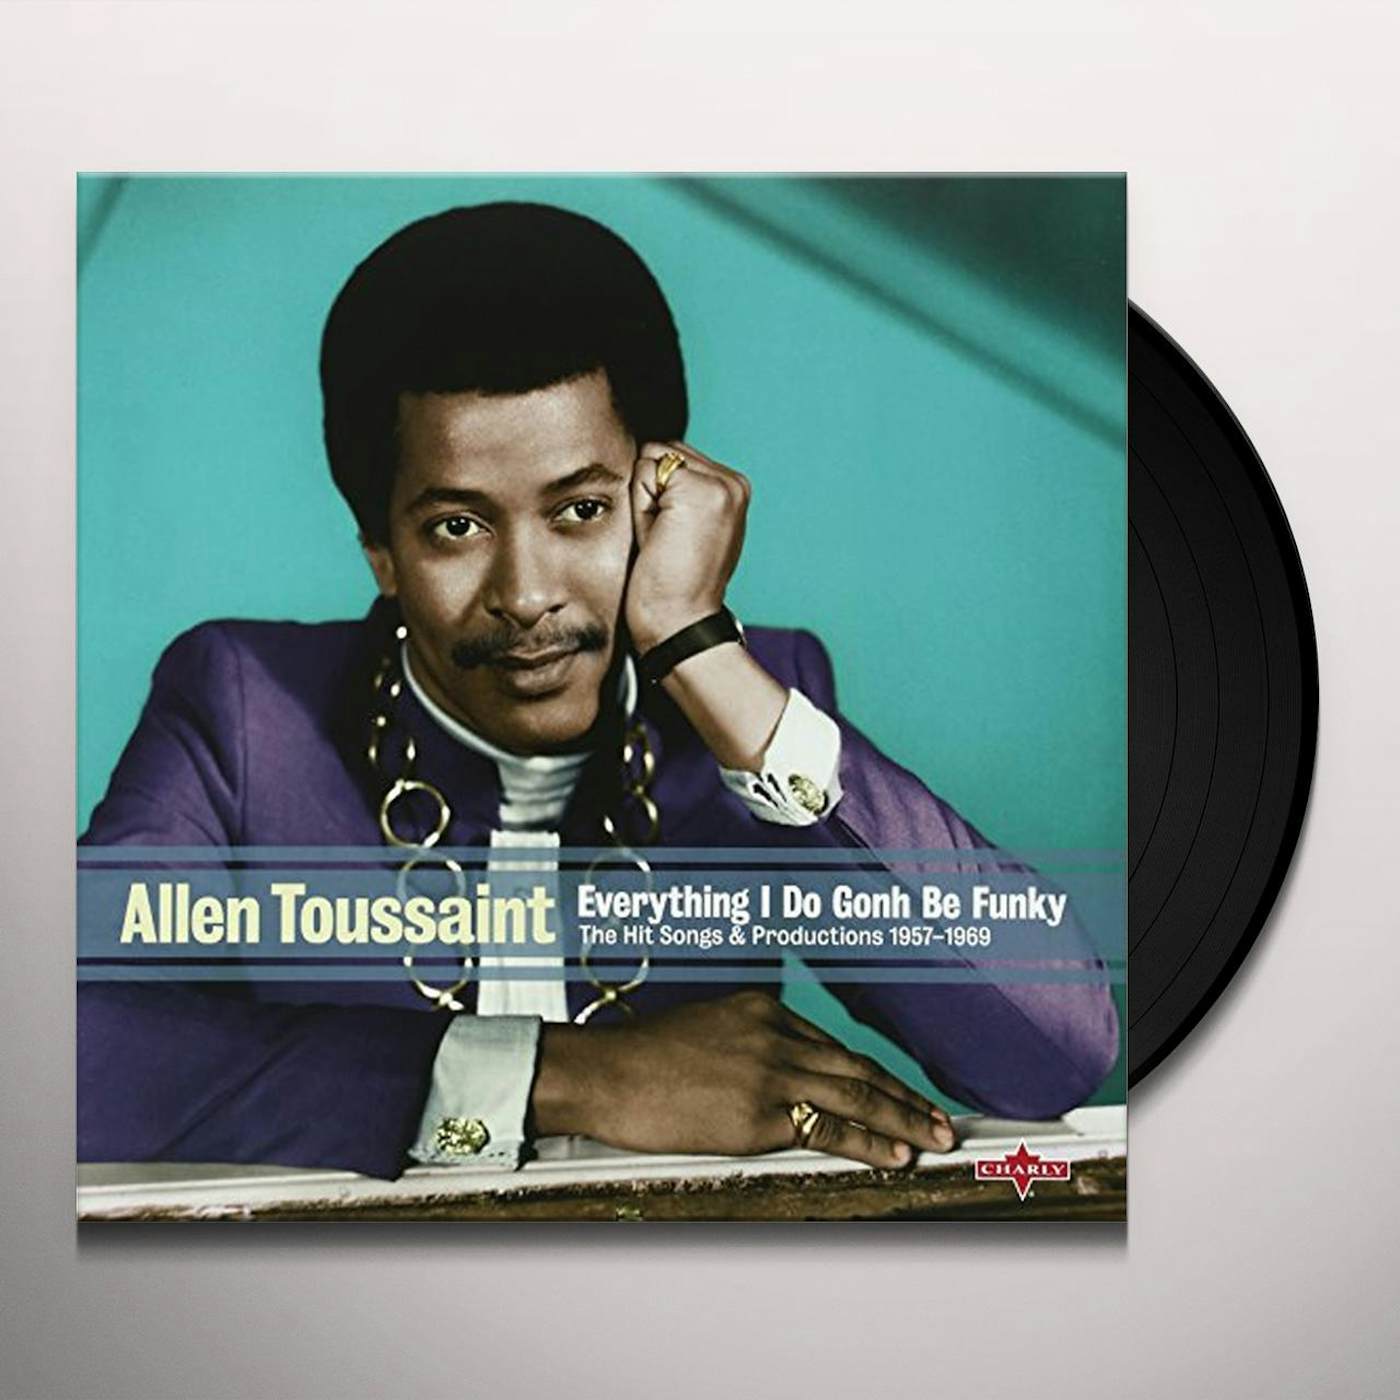 Allen Toussaint EVERYTHING I DO IS GONH BE FUNKY Vinyl Record